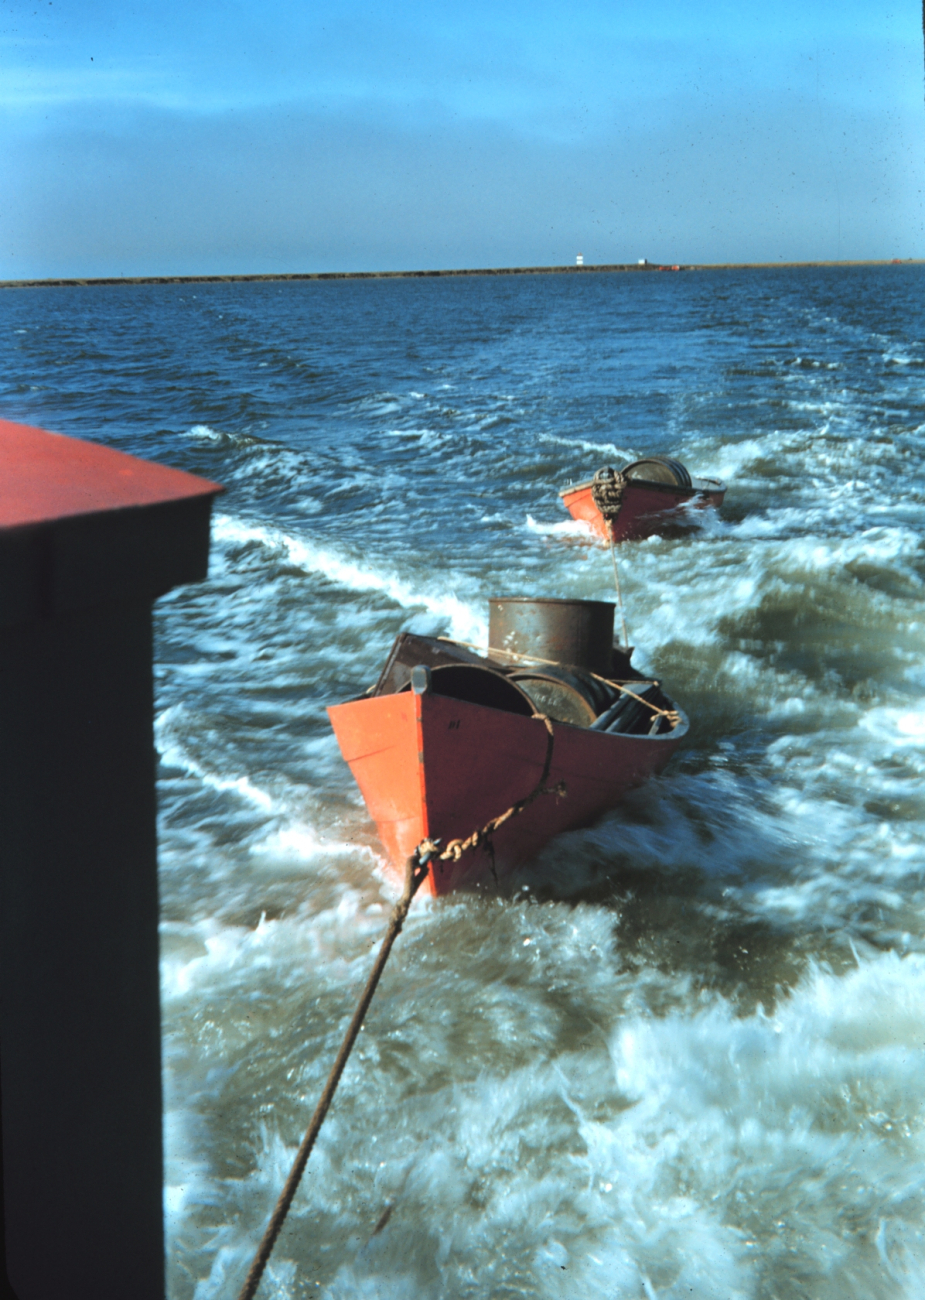 Survey launch towing dinghies after supplying observing camp